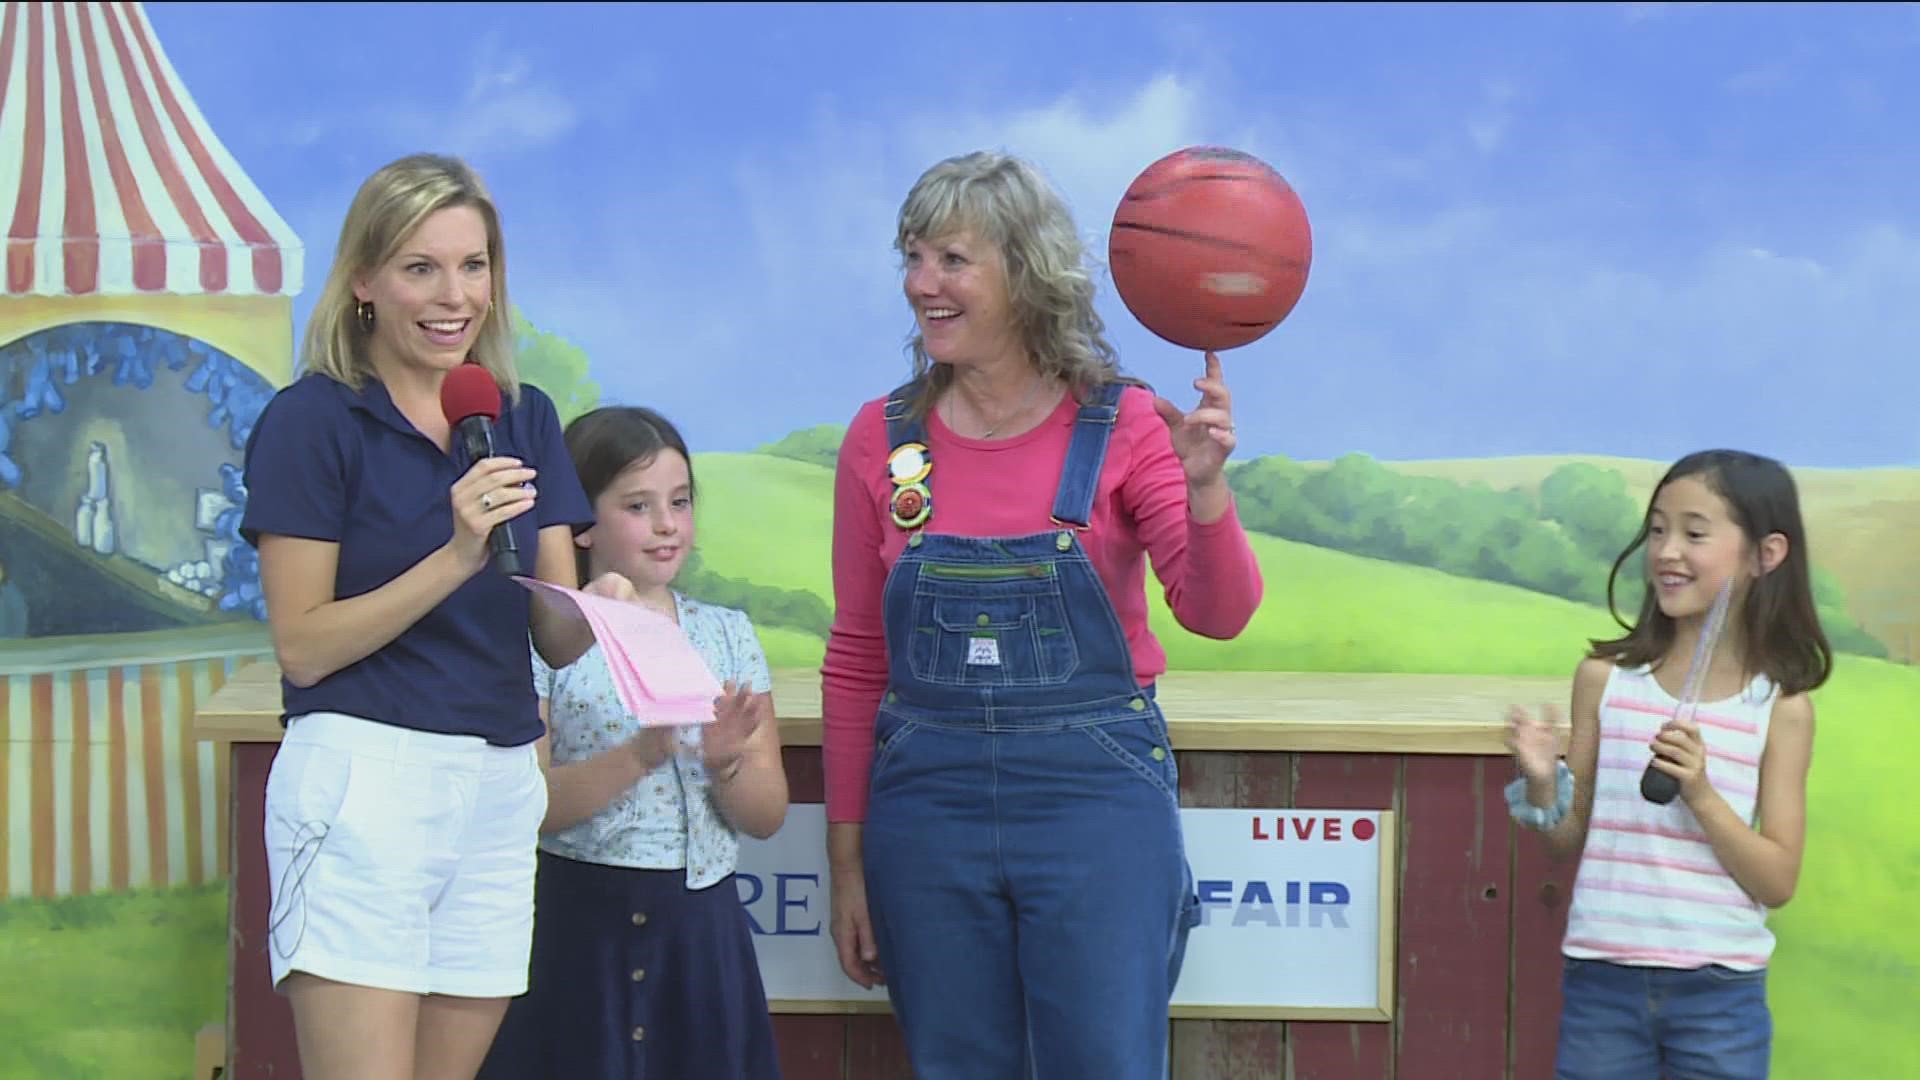 Rhonda Ross Swanson, the creator and the presenter of the "Thank A Farmer Magic Show," stopped by the KARE barn during the 4 p.m. show Friday.